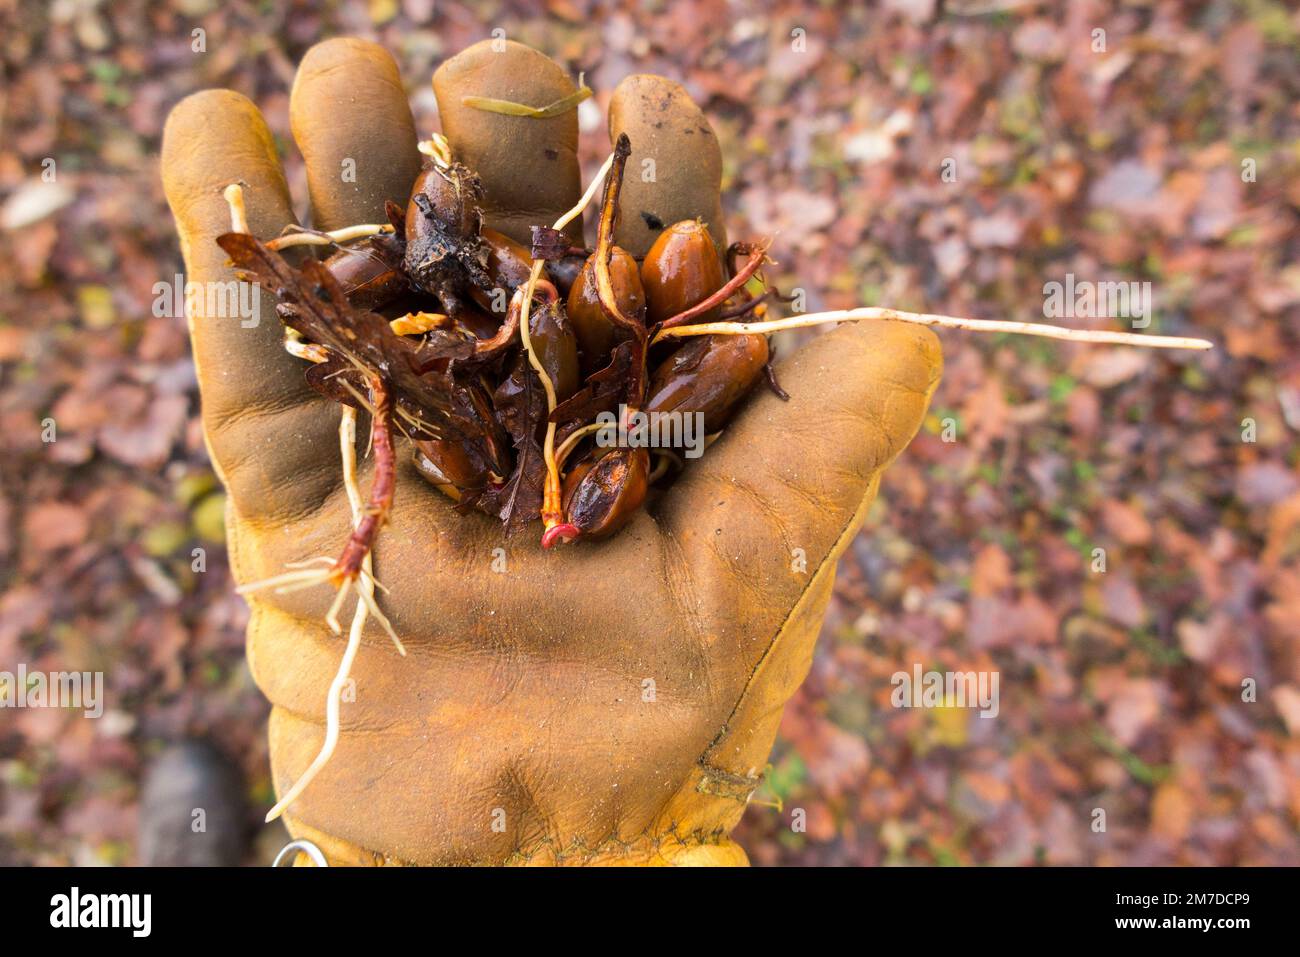 A handful / crop of last summer's ripe acorns as they germinate in fallen leaves under a French oak tree. Long single root from acorn is visible. France. (133) Stock Photo